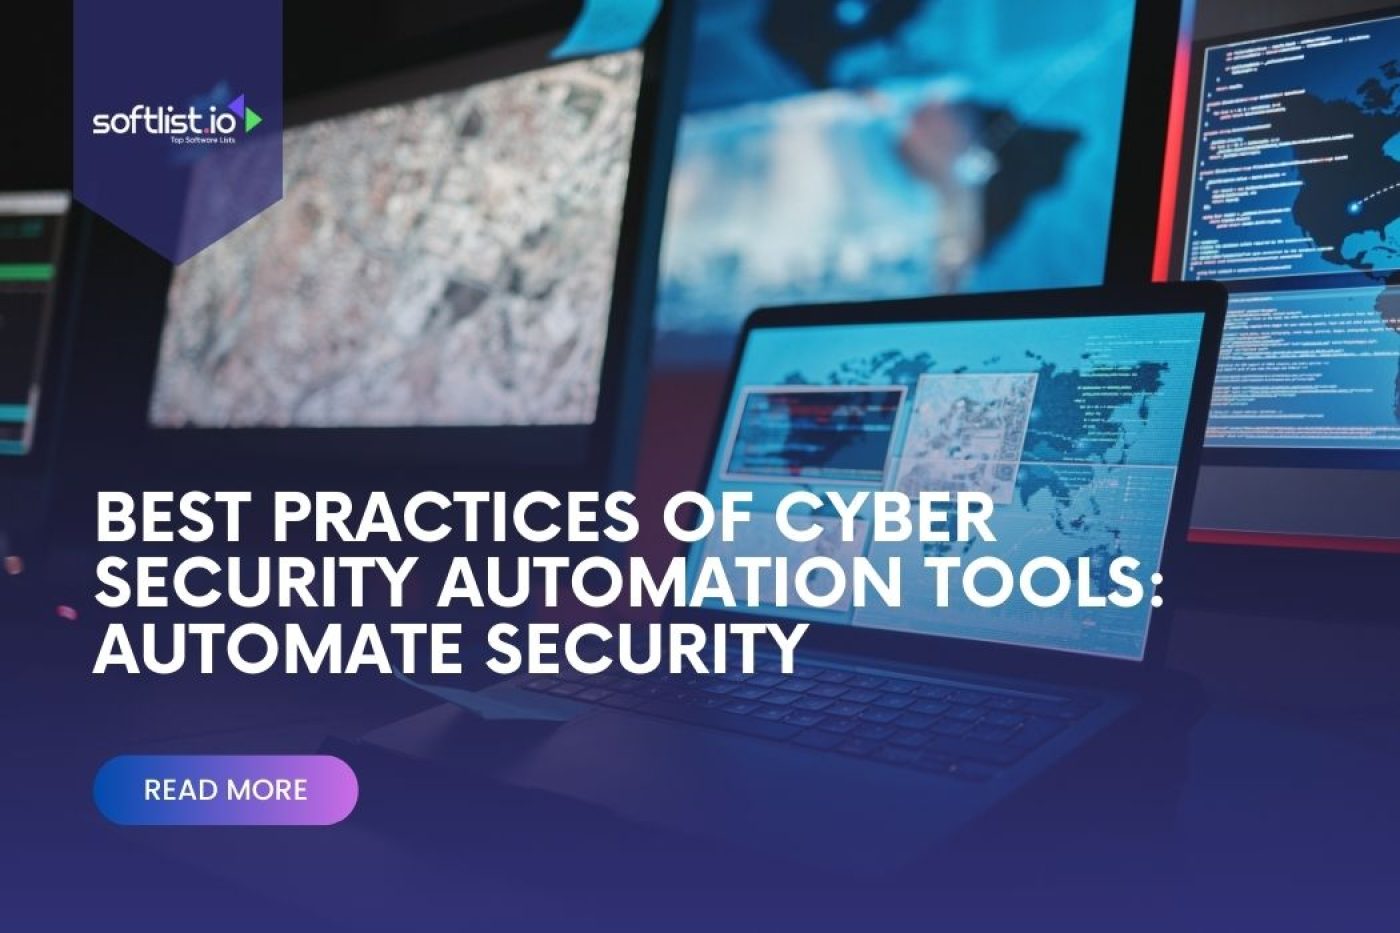 Cyber Security Automation Tools Guide